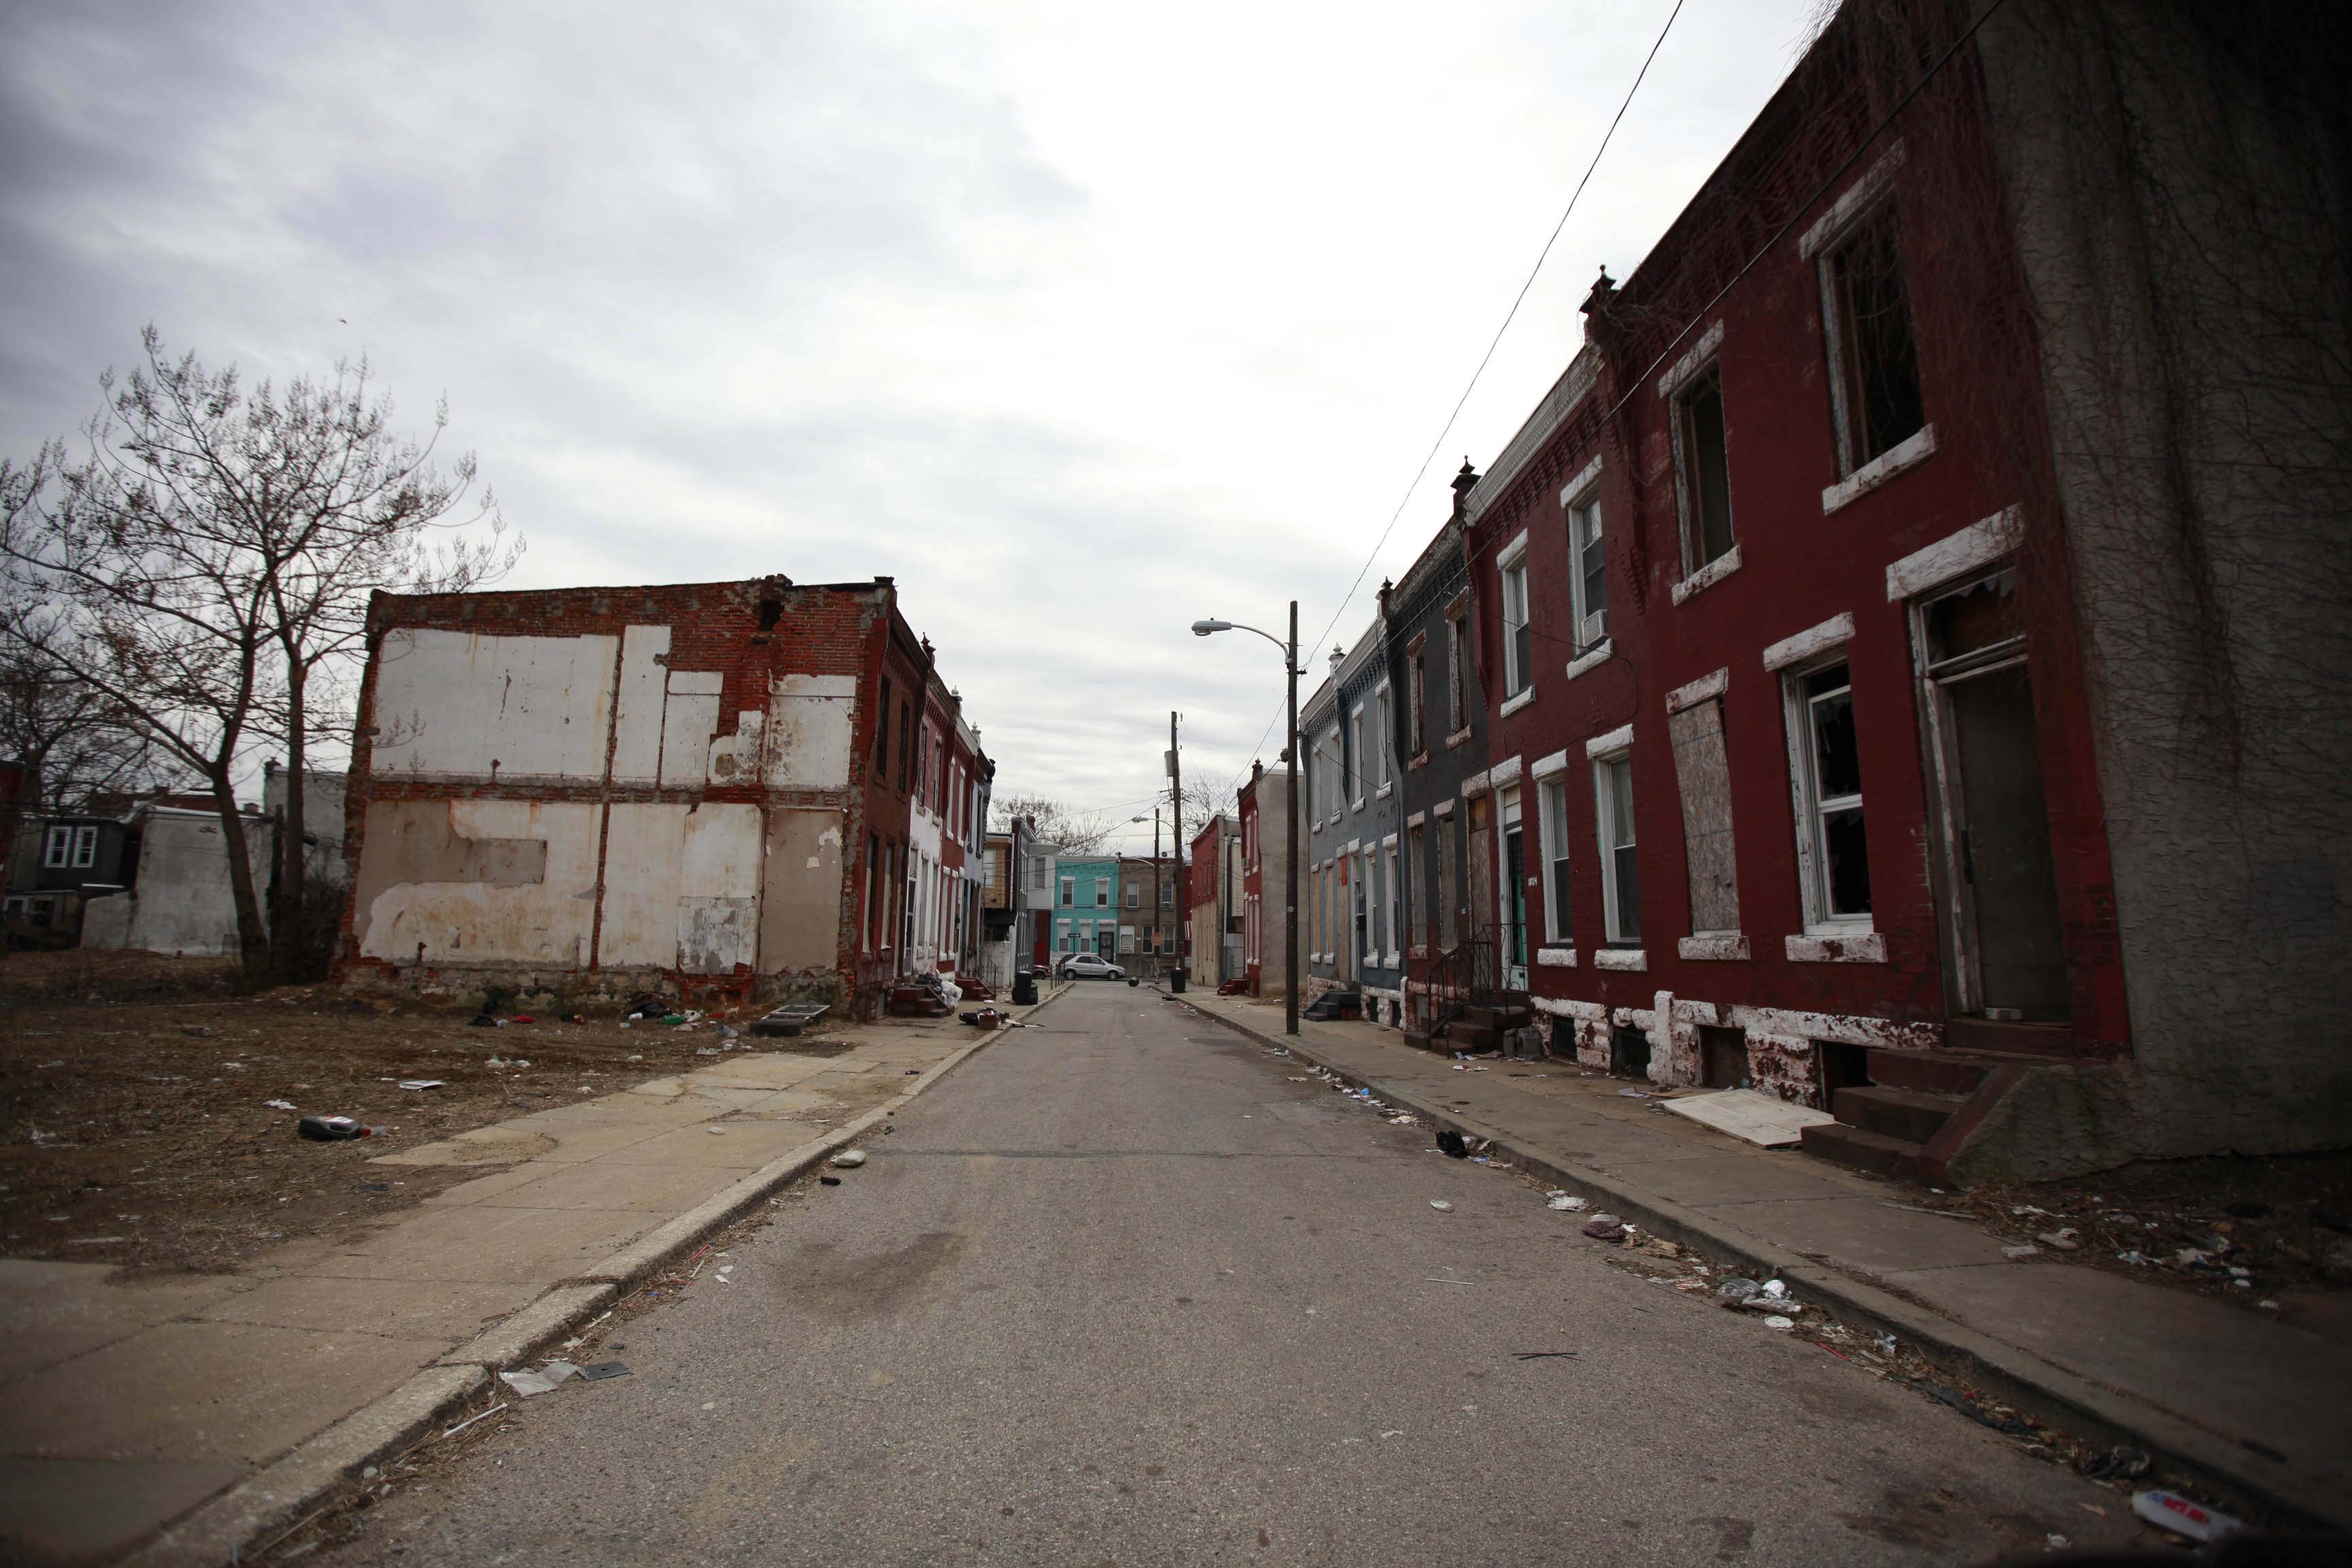 1800 block of N. Marston where GLC Group owns 15 properties and was photographed February 22, 2013. (David Swanson / Inquirer Staff Photographer)